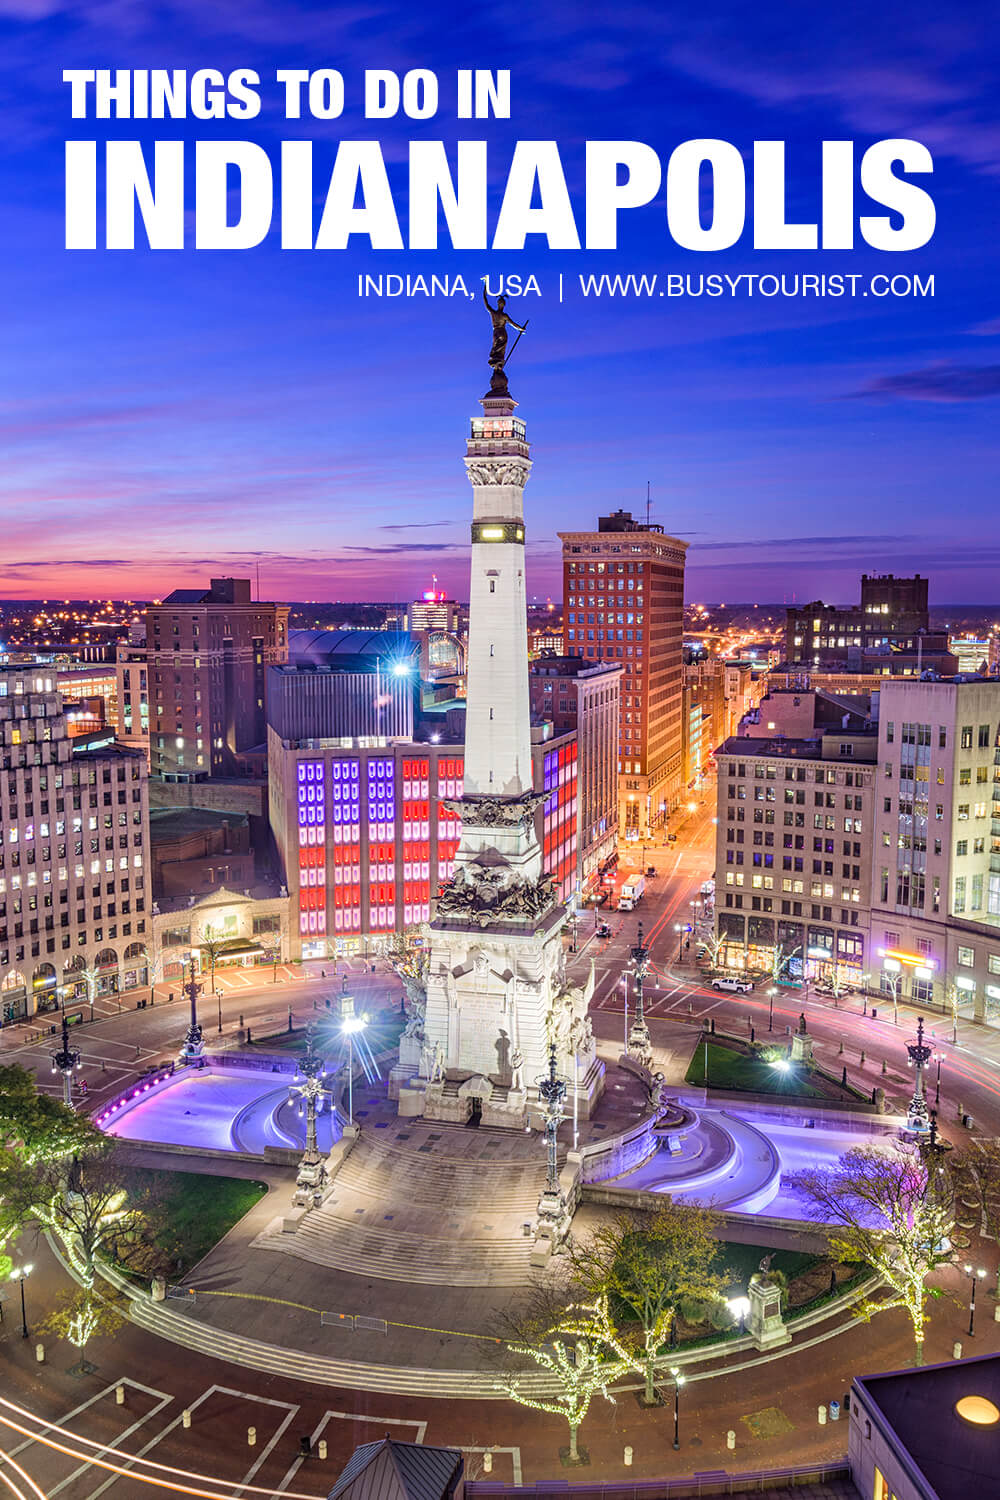 30 Fun Things To Do In Indianapolis (Indiana) Attractions & Activities